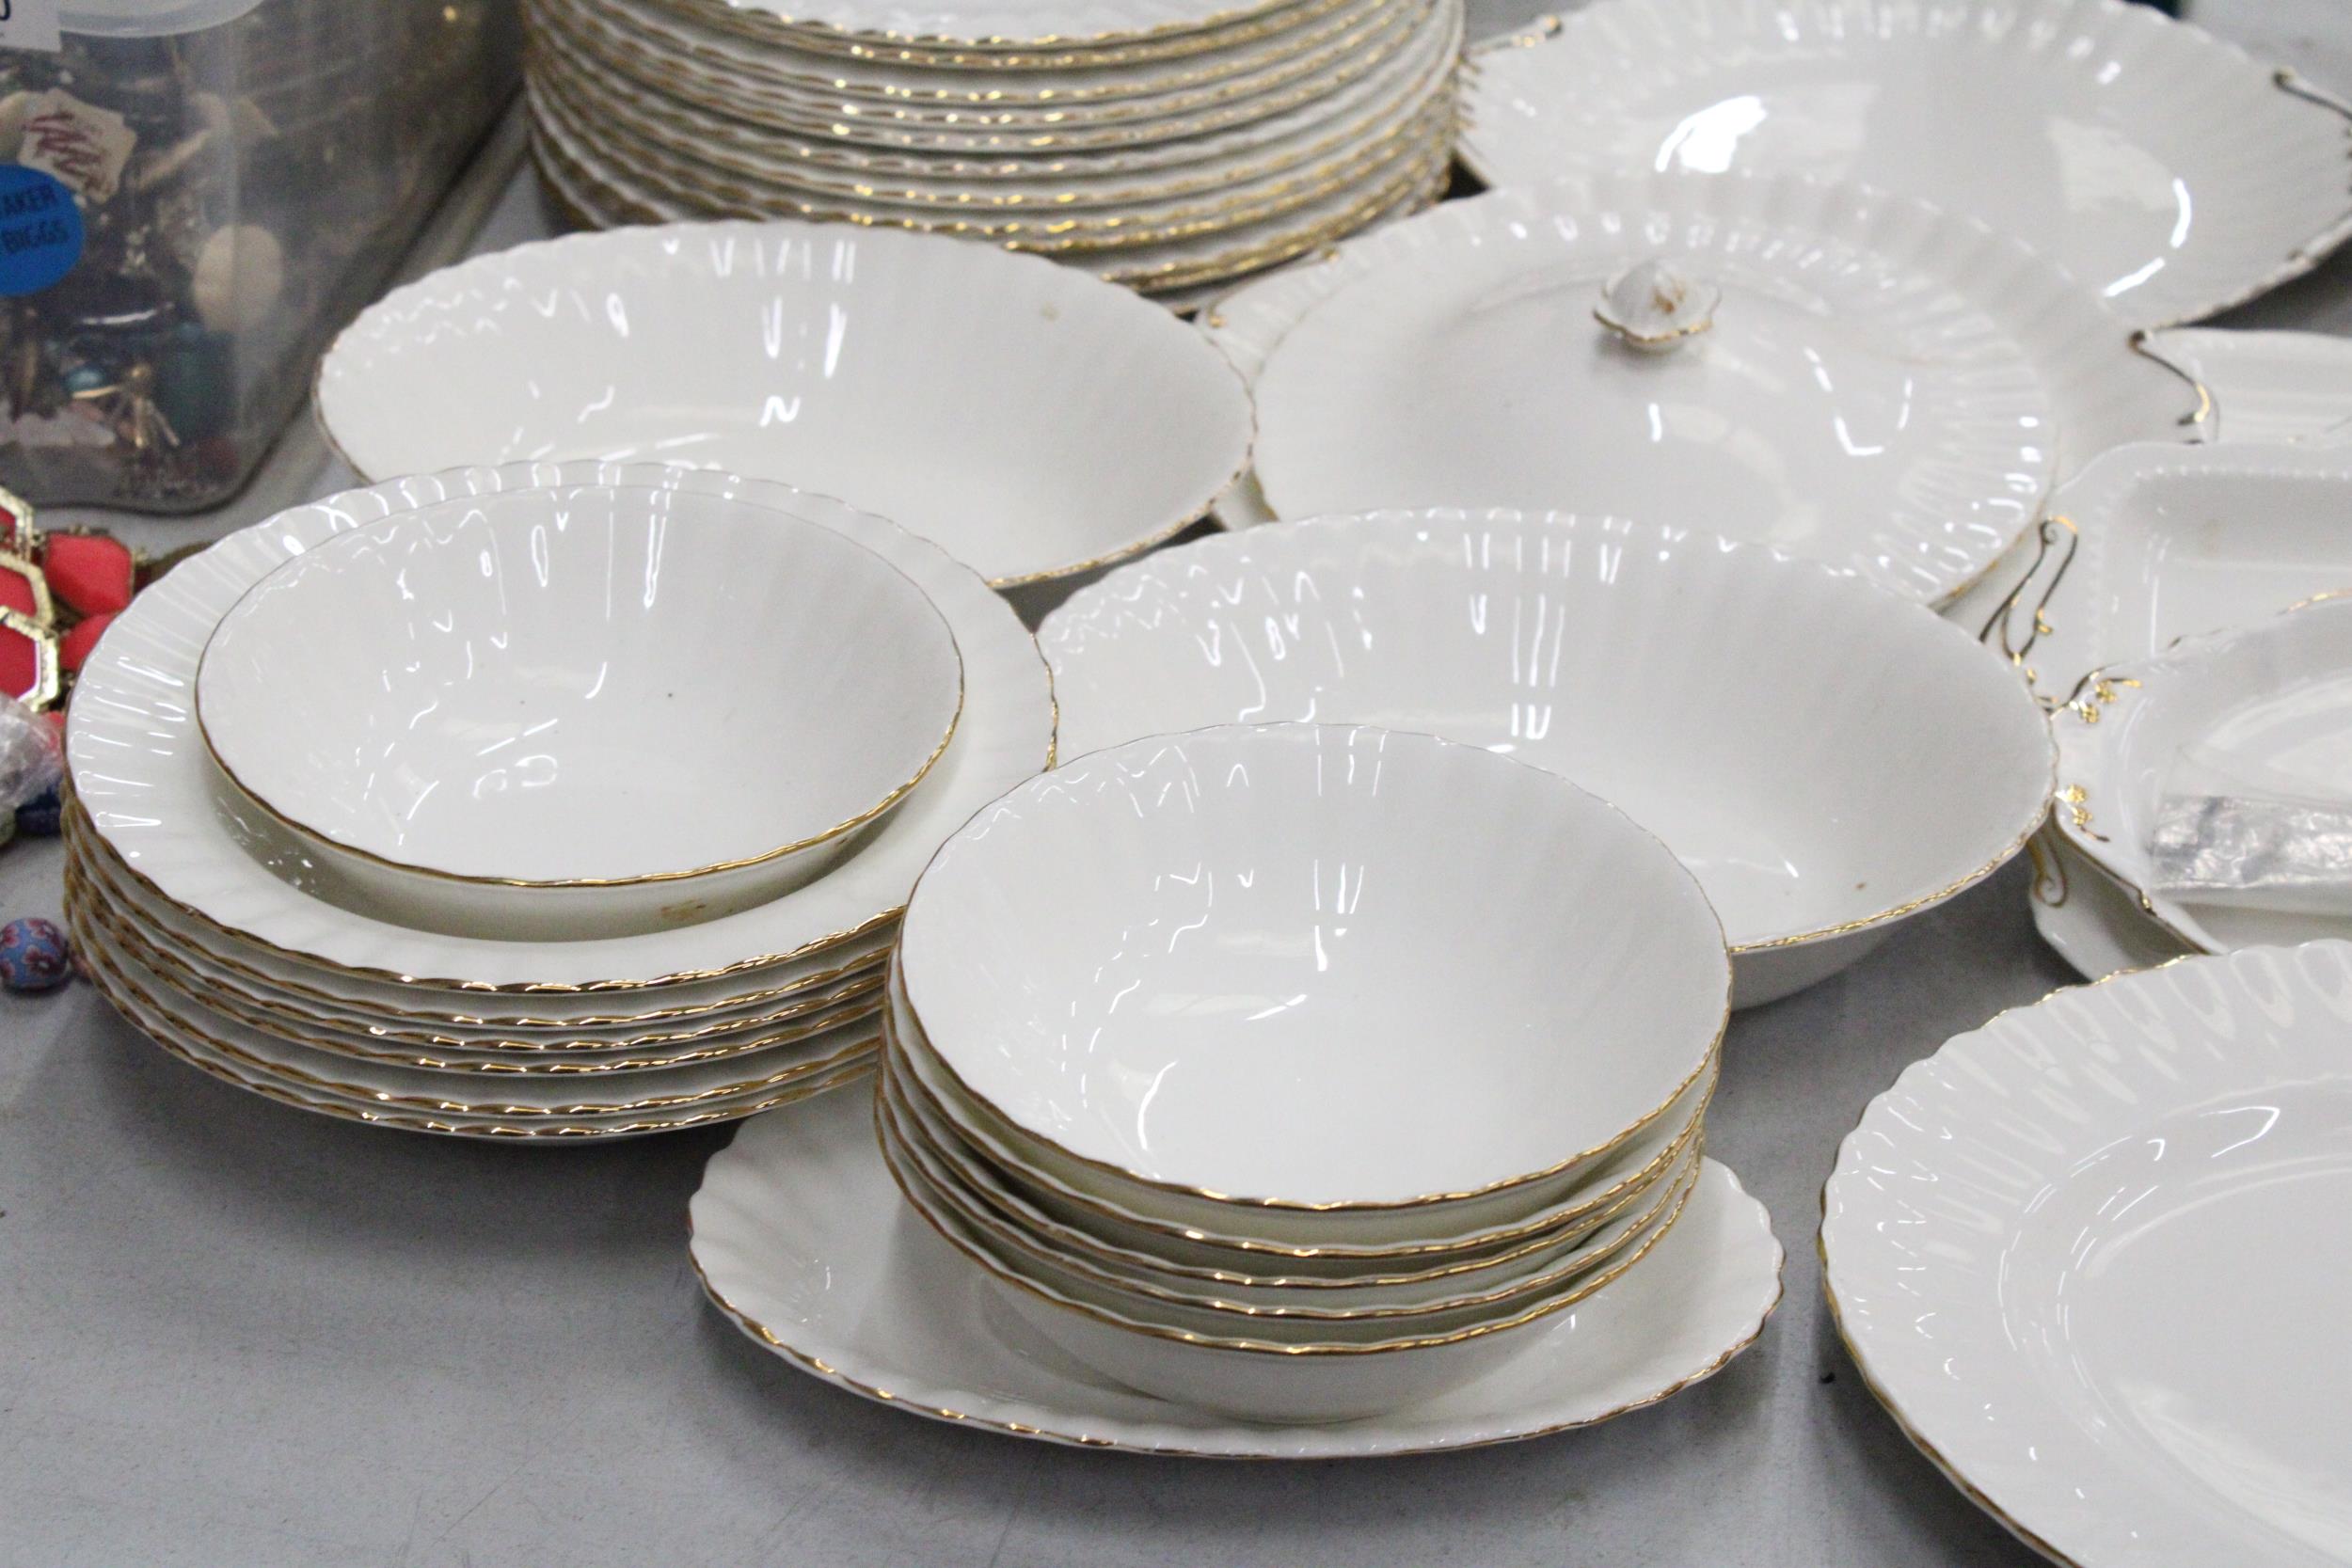 A LARGE ROYAL ALBERT PART DINNER SERVIE "VAL DOR" TO INCLUDE PLATES, CUPS, SAUCERS, TEAPOT, COFFEE - Image 2 of 6